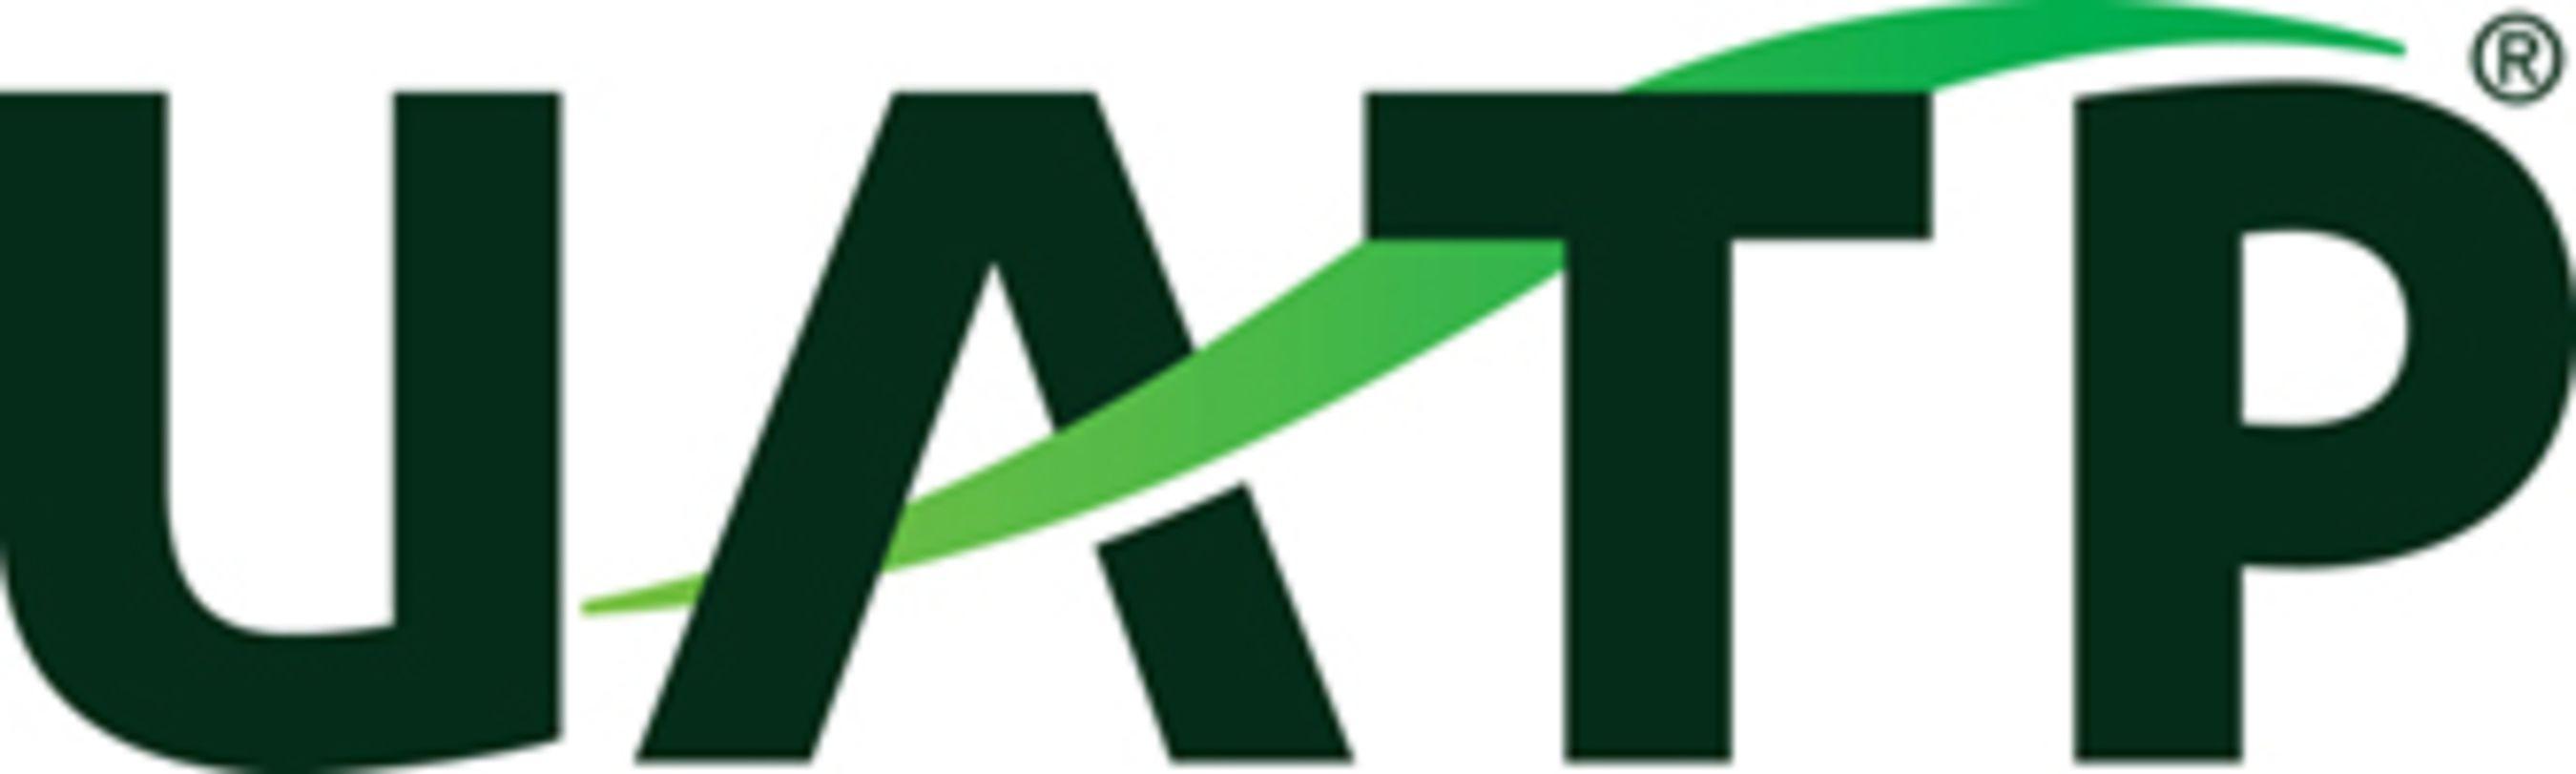 Green Payment Business Logo - UATP Teams With Affirm To Deliver New Payment Solutions For Its